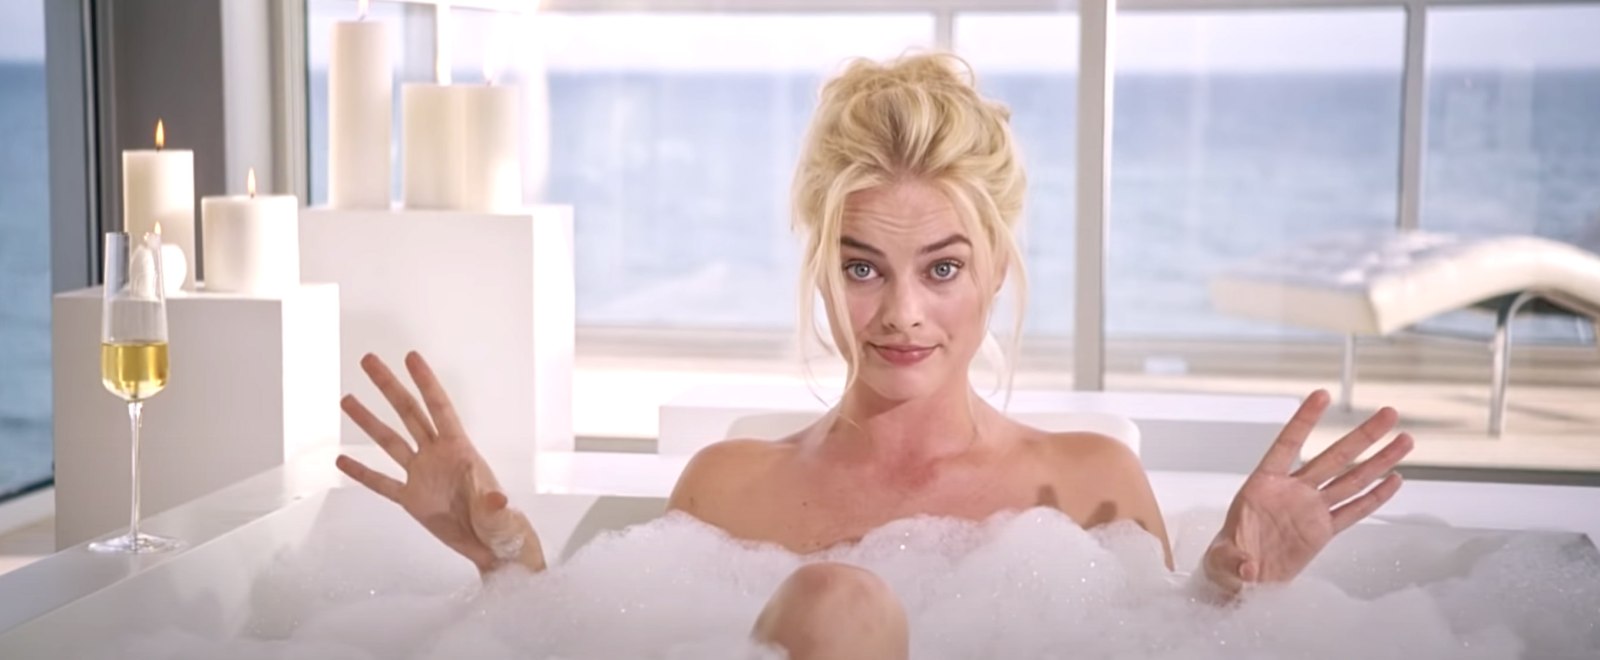 ‘The Daily Show’ Couldn’t Get Margot Robbie To Explain What’s Happening With Reddit And GameStop, But It Found The Next Best Thing